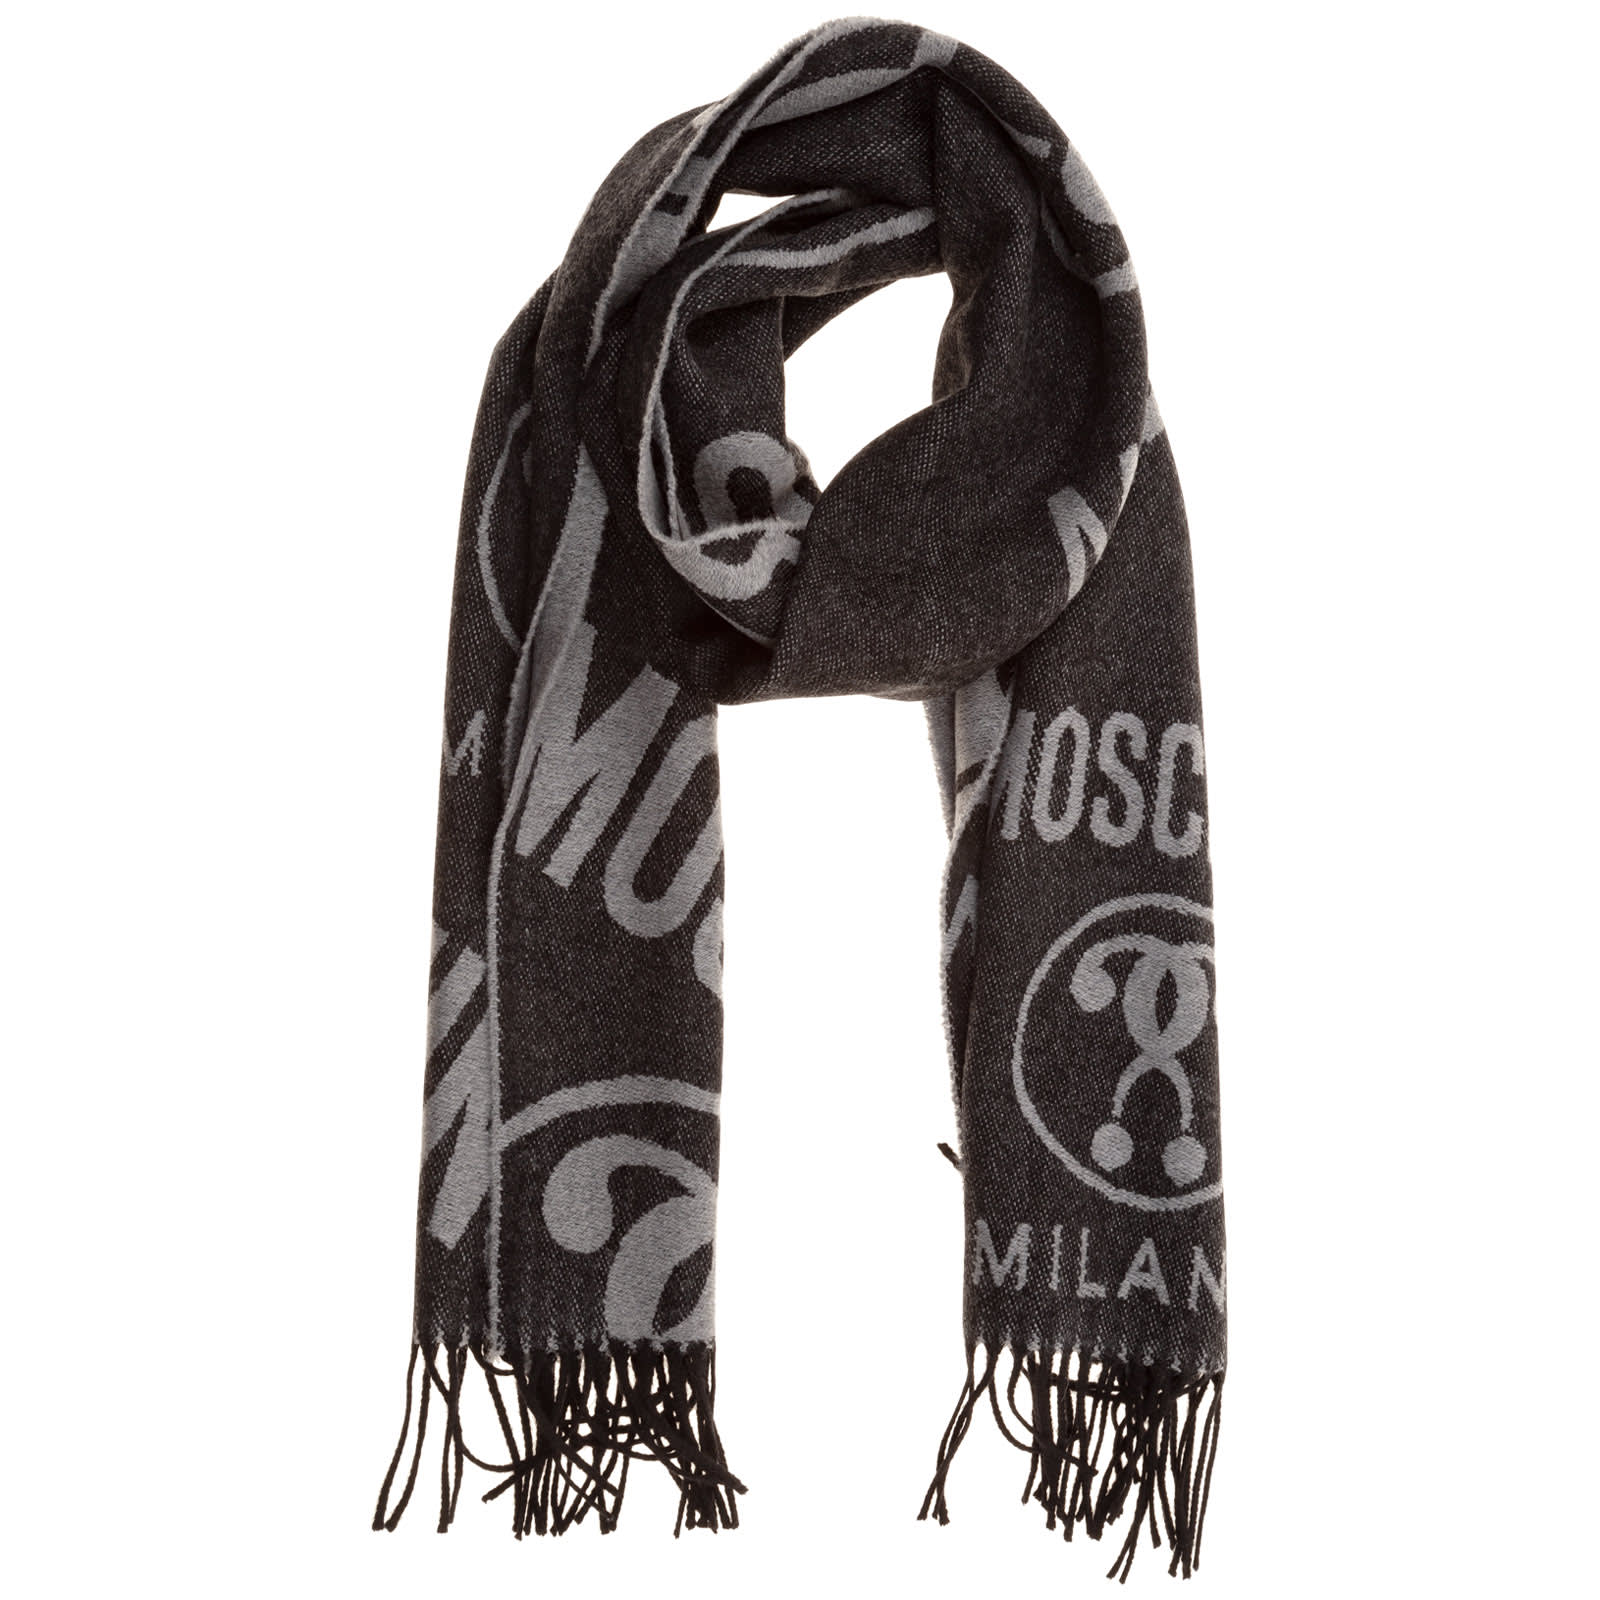 MOSCHINO DOUBLE QUESTION MARK WOOL SCARF,M541450152004